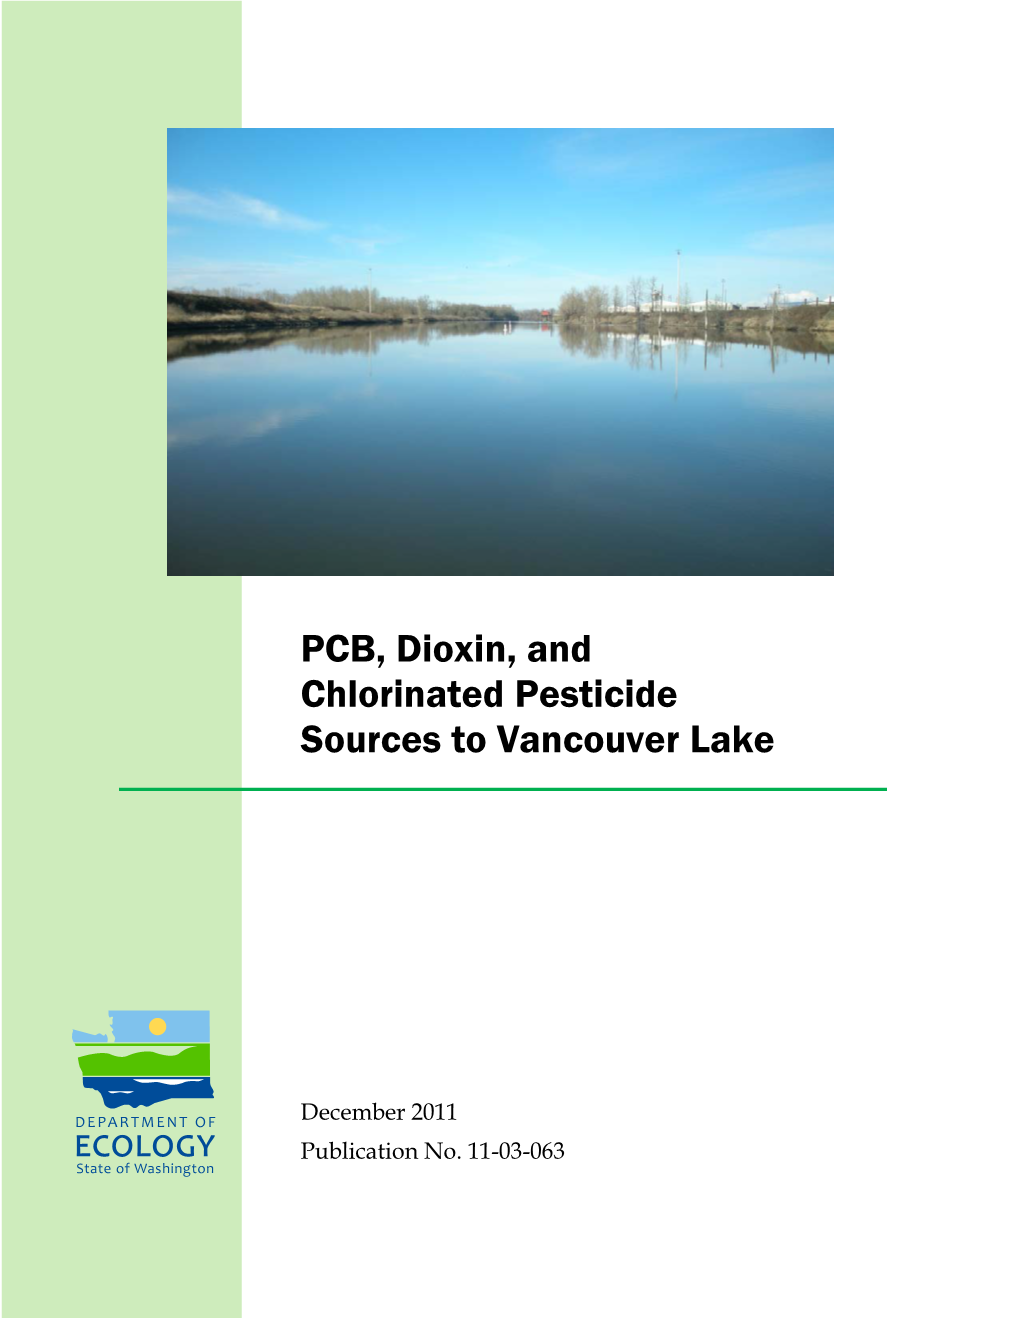 PCB, Dioxin, and Chlorinated Pesticide Sources to Vancouver Lake